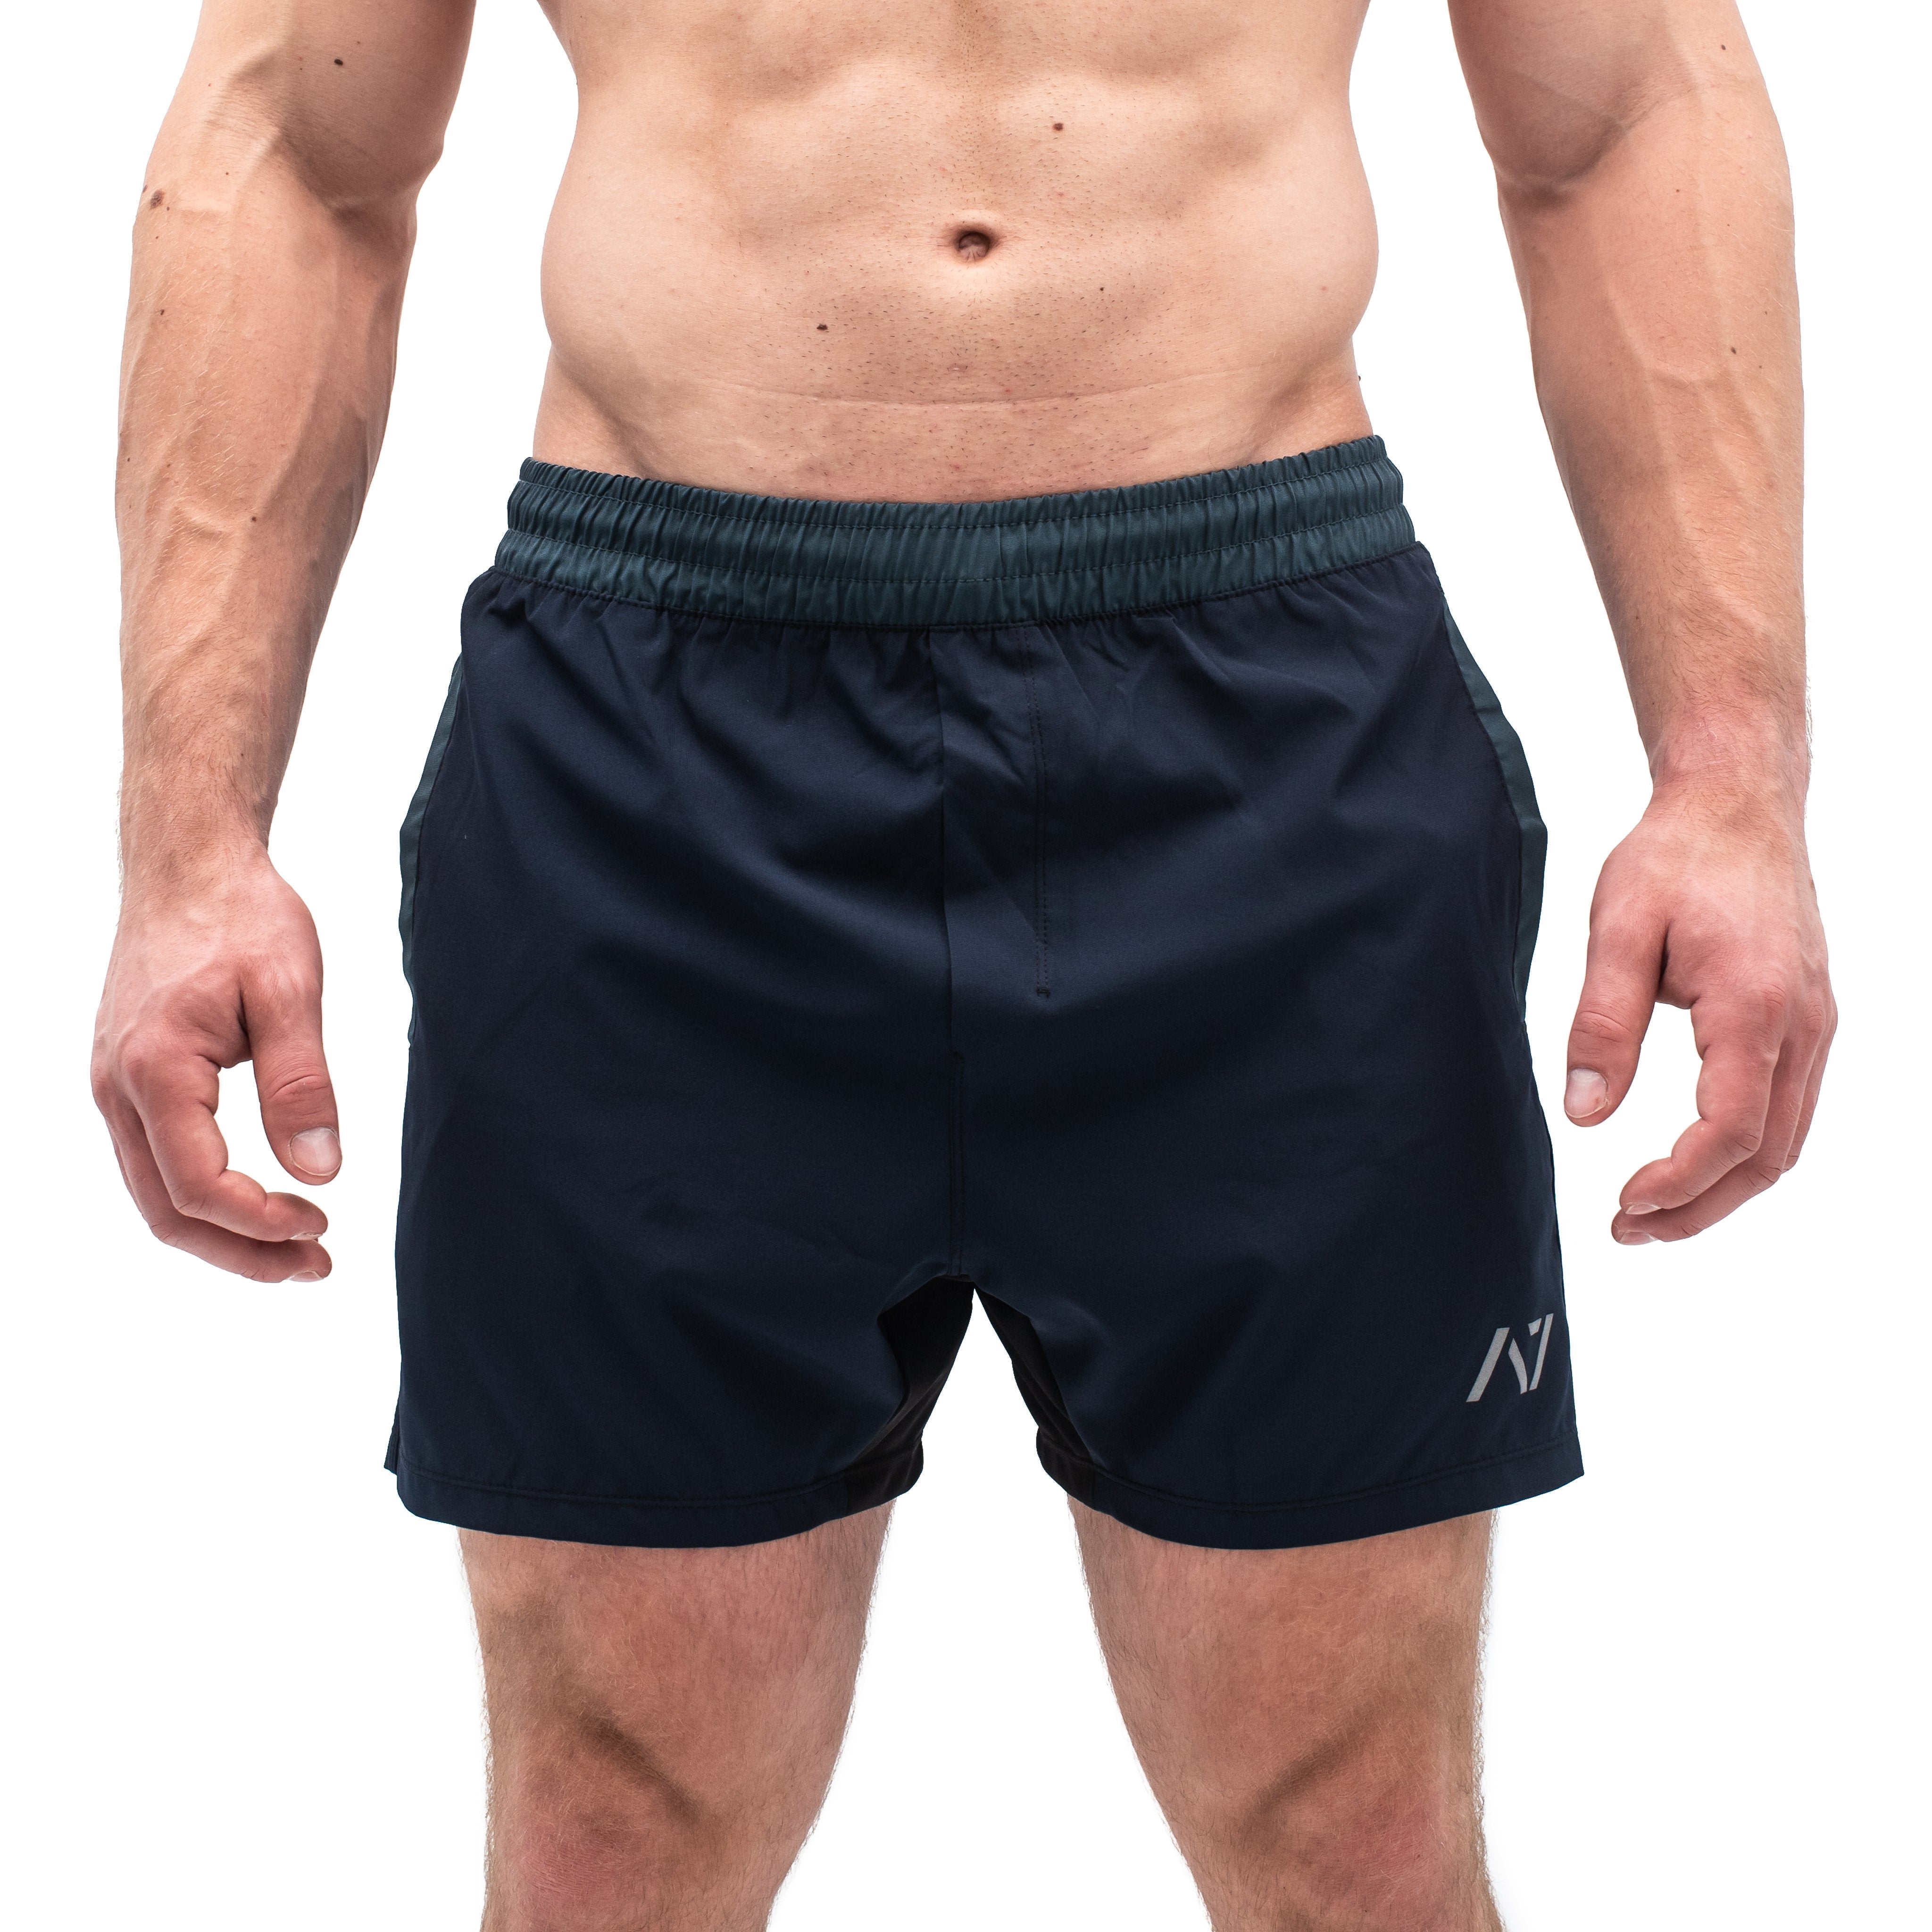 A dual colour-way inspired by the natural discolouration of iron when is formed. Named after our love for the iron and themed on the dark colours that set the mood for maintaining the focus to achieve your goals. It's all about avoiding distractions and with our Centre stretch of these shorts you can maintain the fit you want with the added comfort of a little extra stretch for all the movements life and your training takes you.